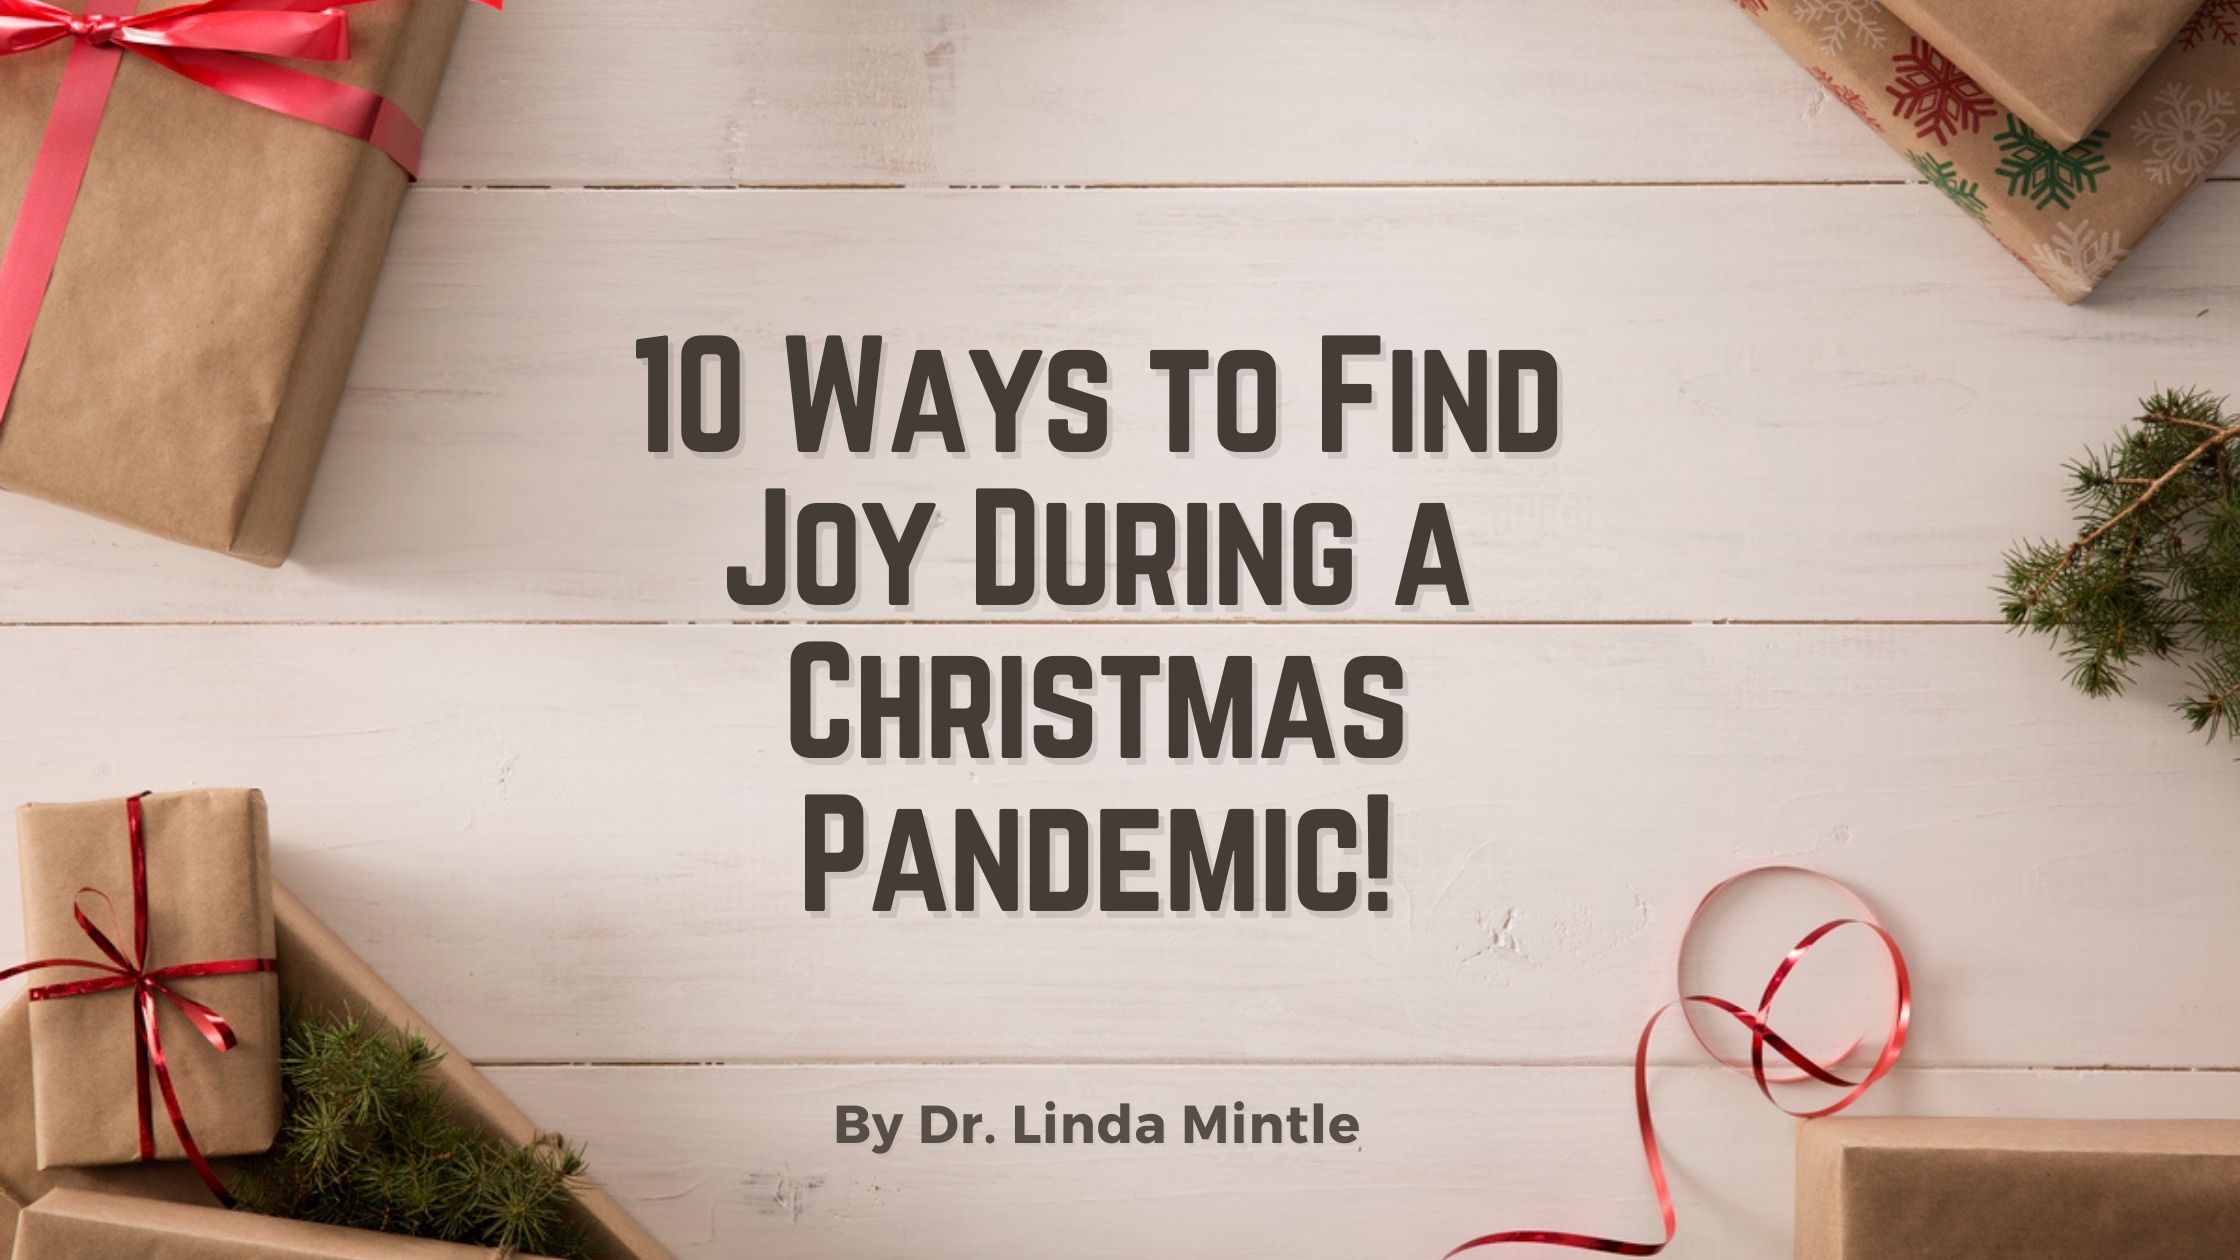 10 Ways to Find Joy During a Christmas Pandemic!